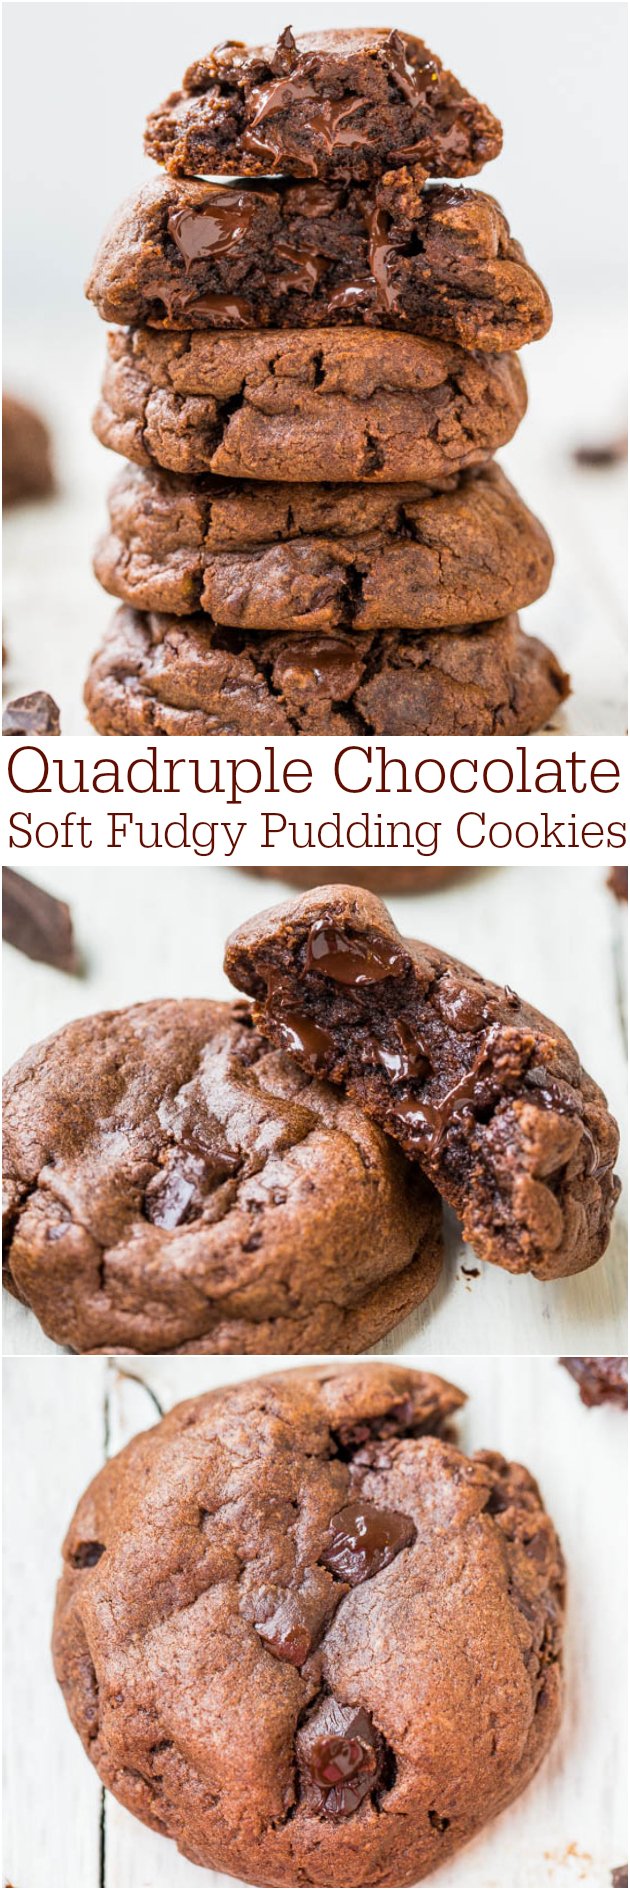 Quadruple Chocolate Soft Fudgy Pudding Cookies - Super soft and loaded with chocolate! They'll handle your fiercest chocolate cravings!!